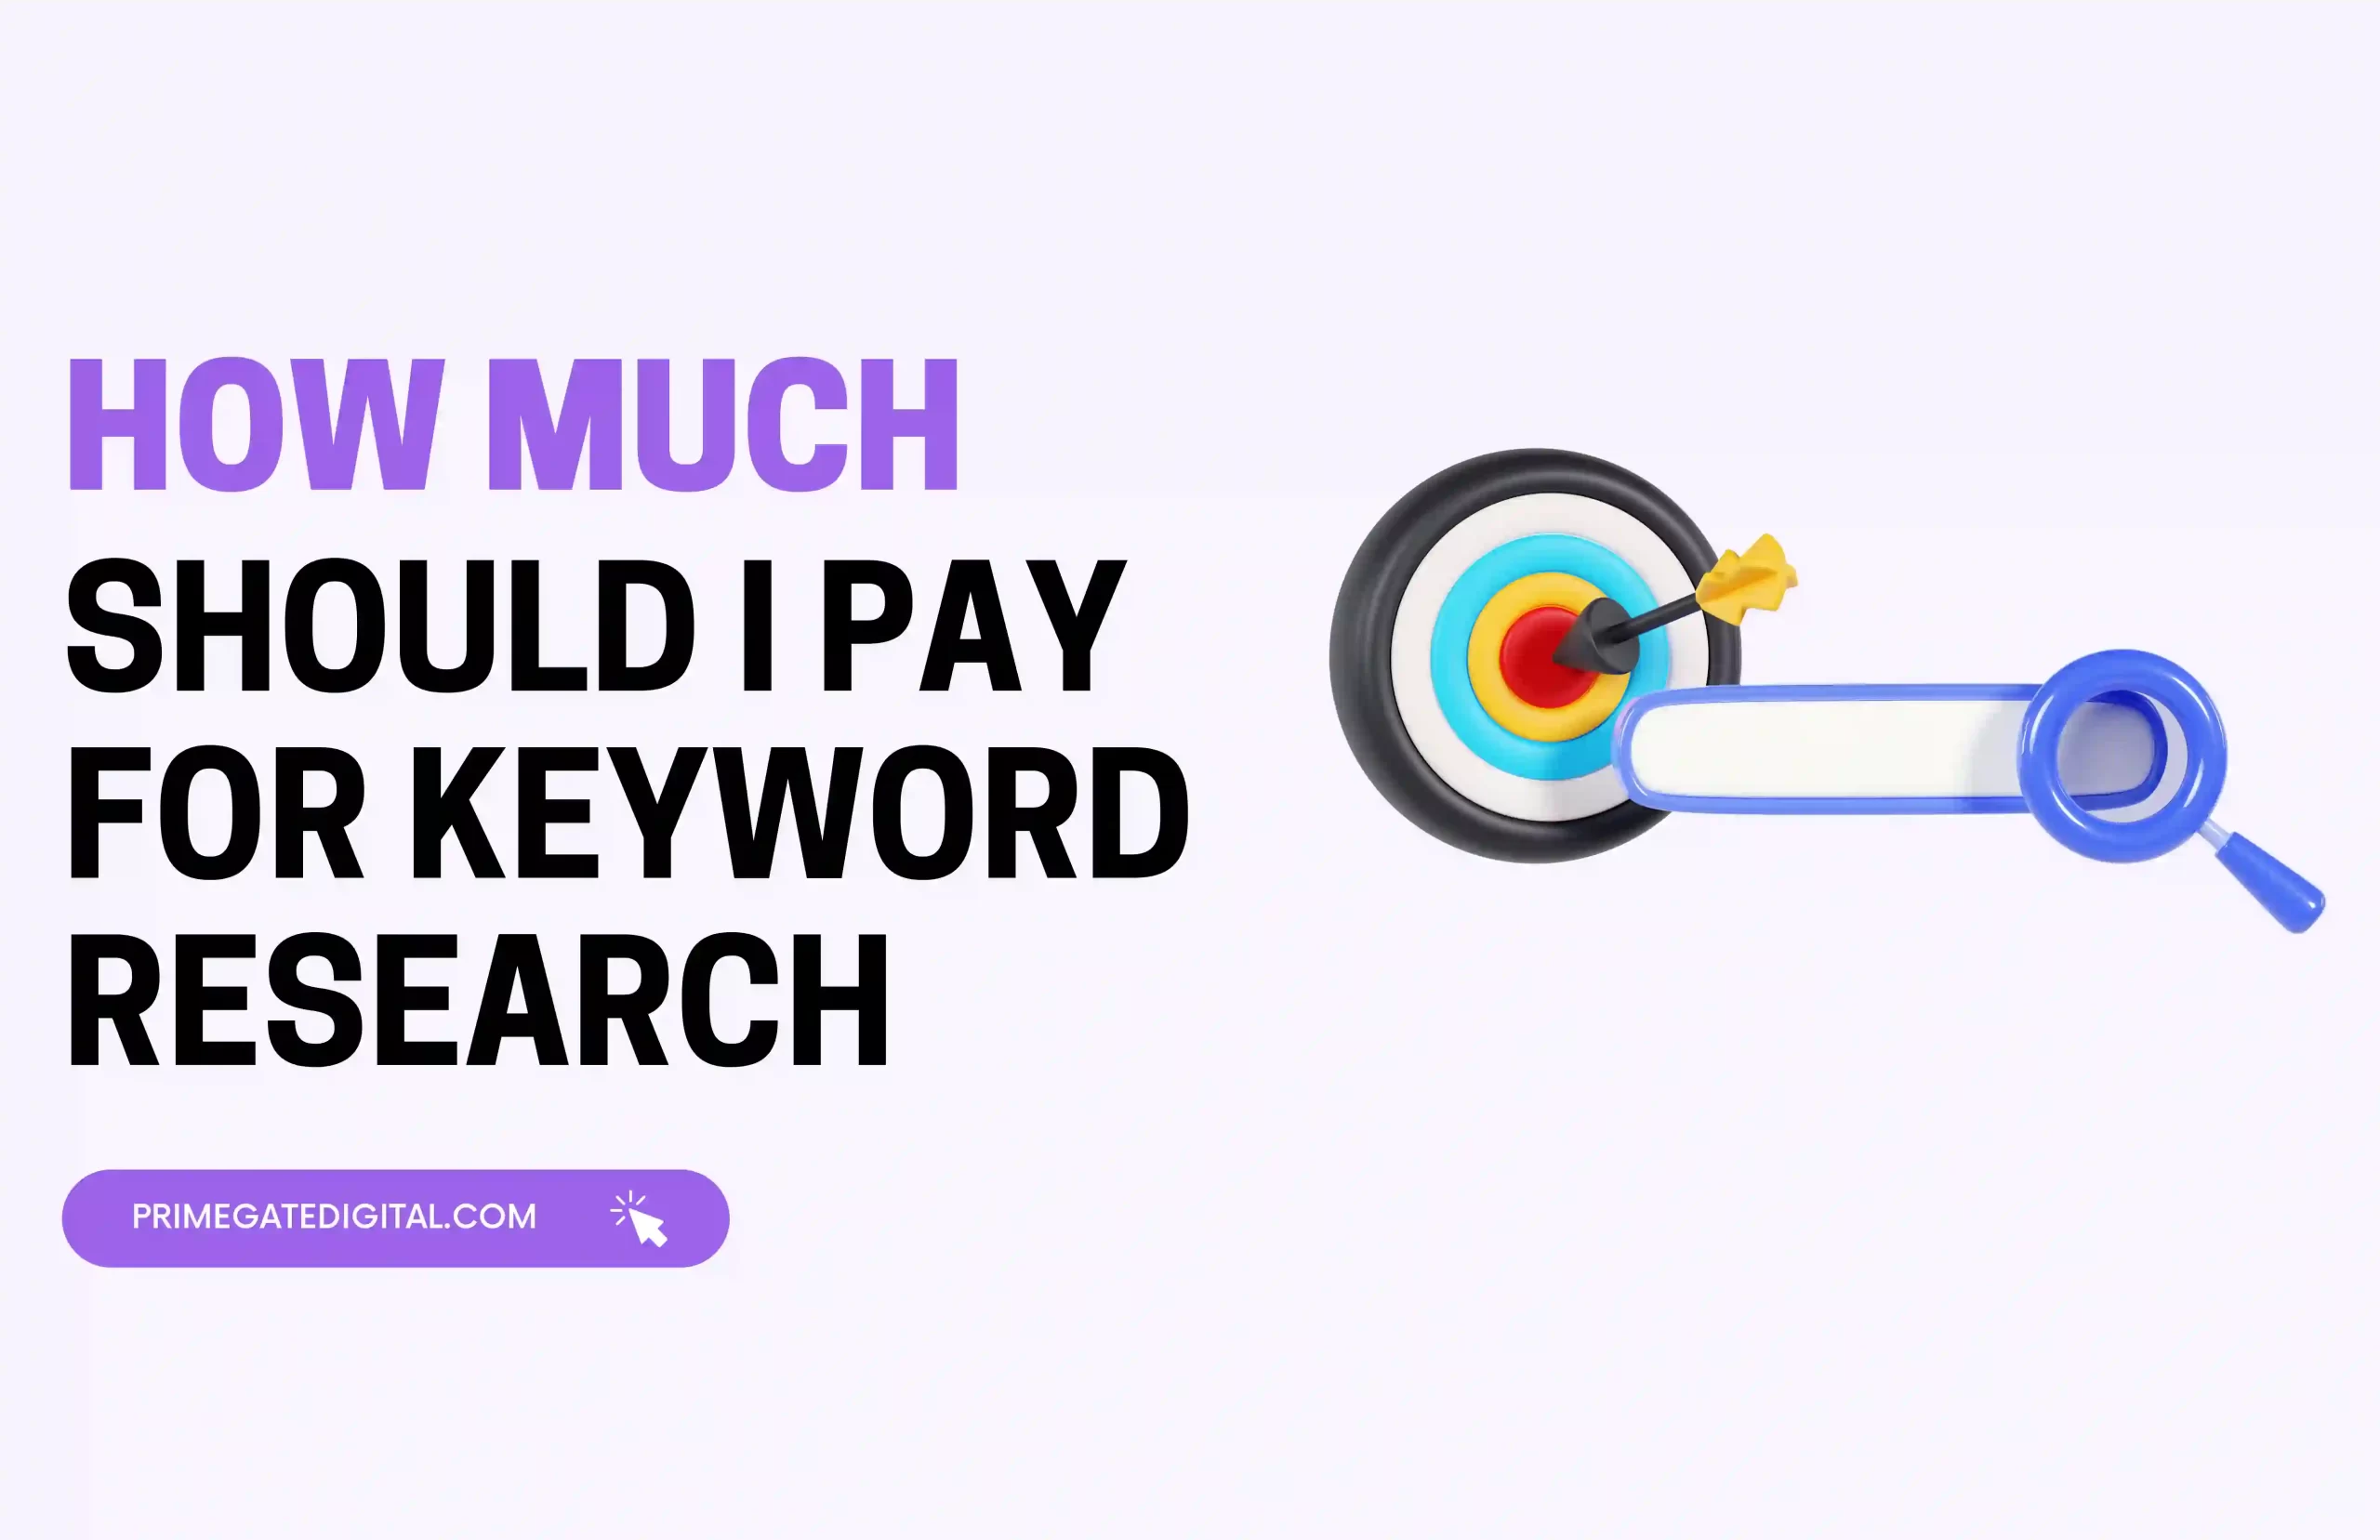 How Much Should I Pay for Keyword Research